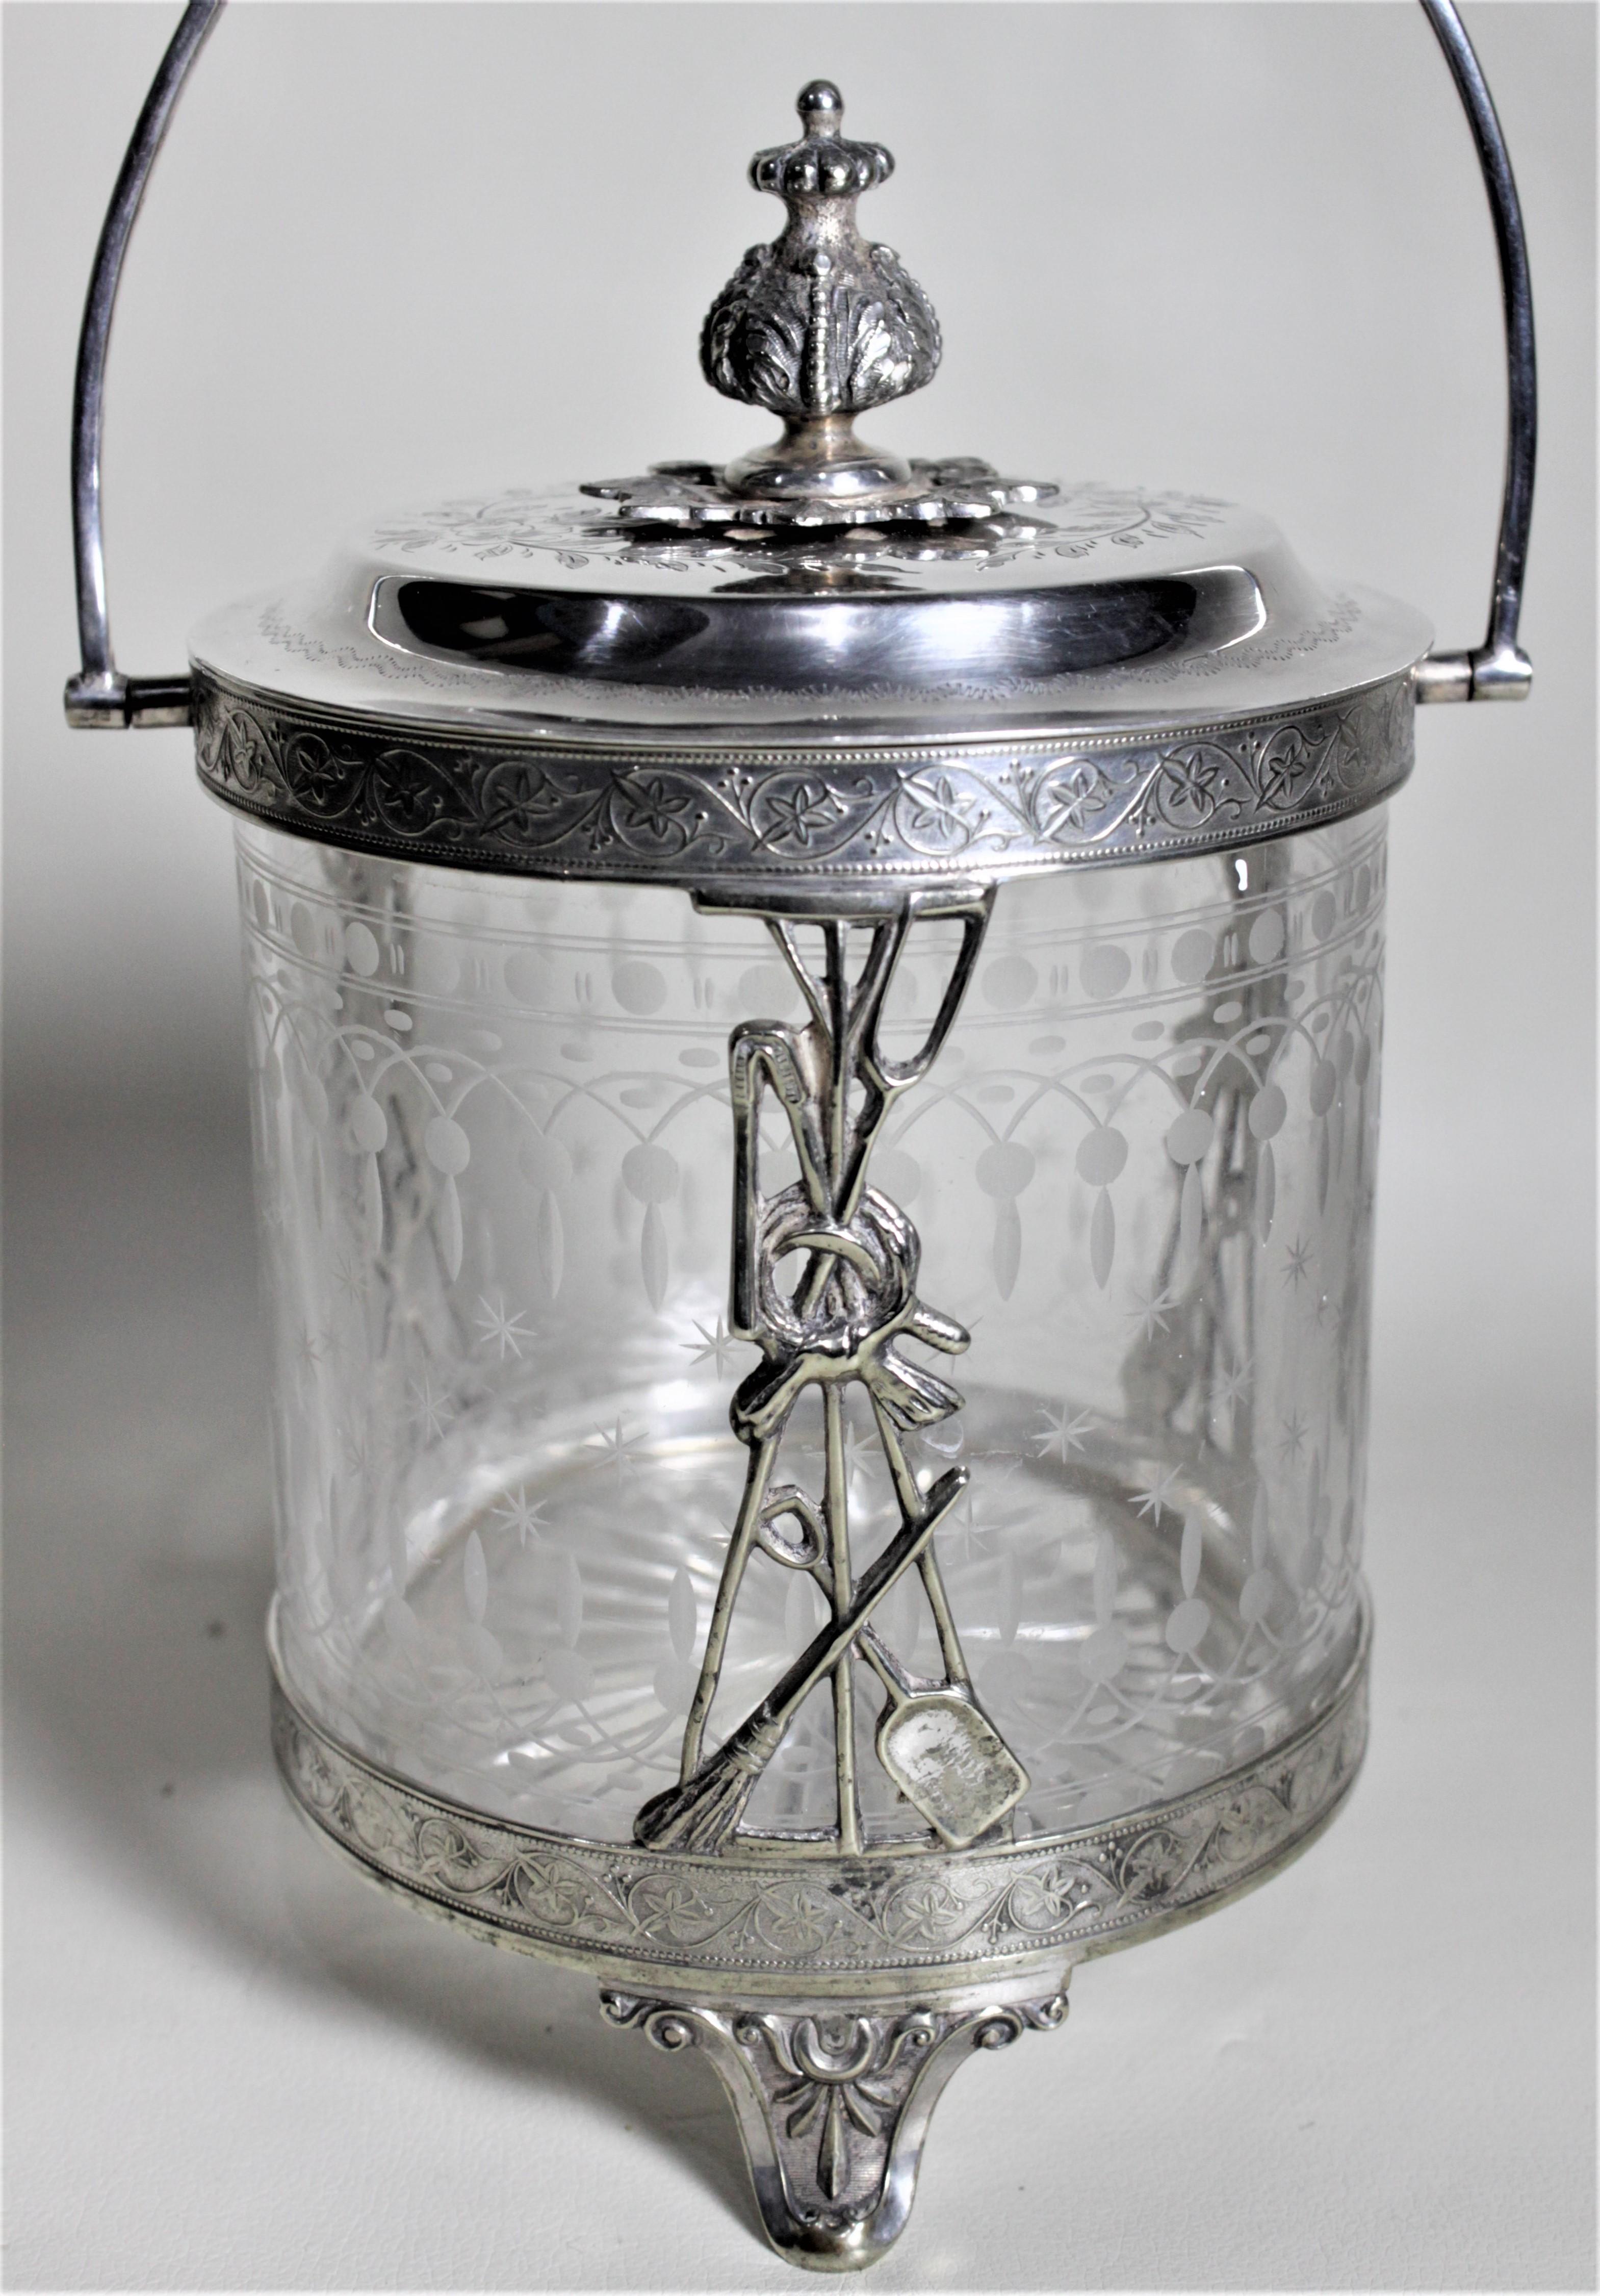 Antique Silver Plated Biscuit Barrel with Figural Decor & Etched Glass Insert 5